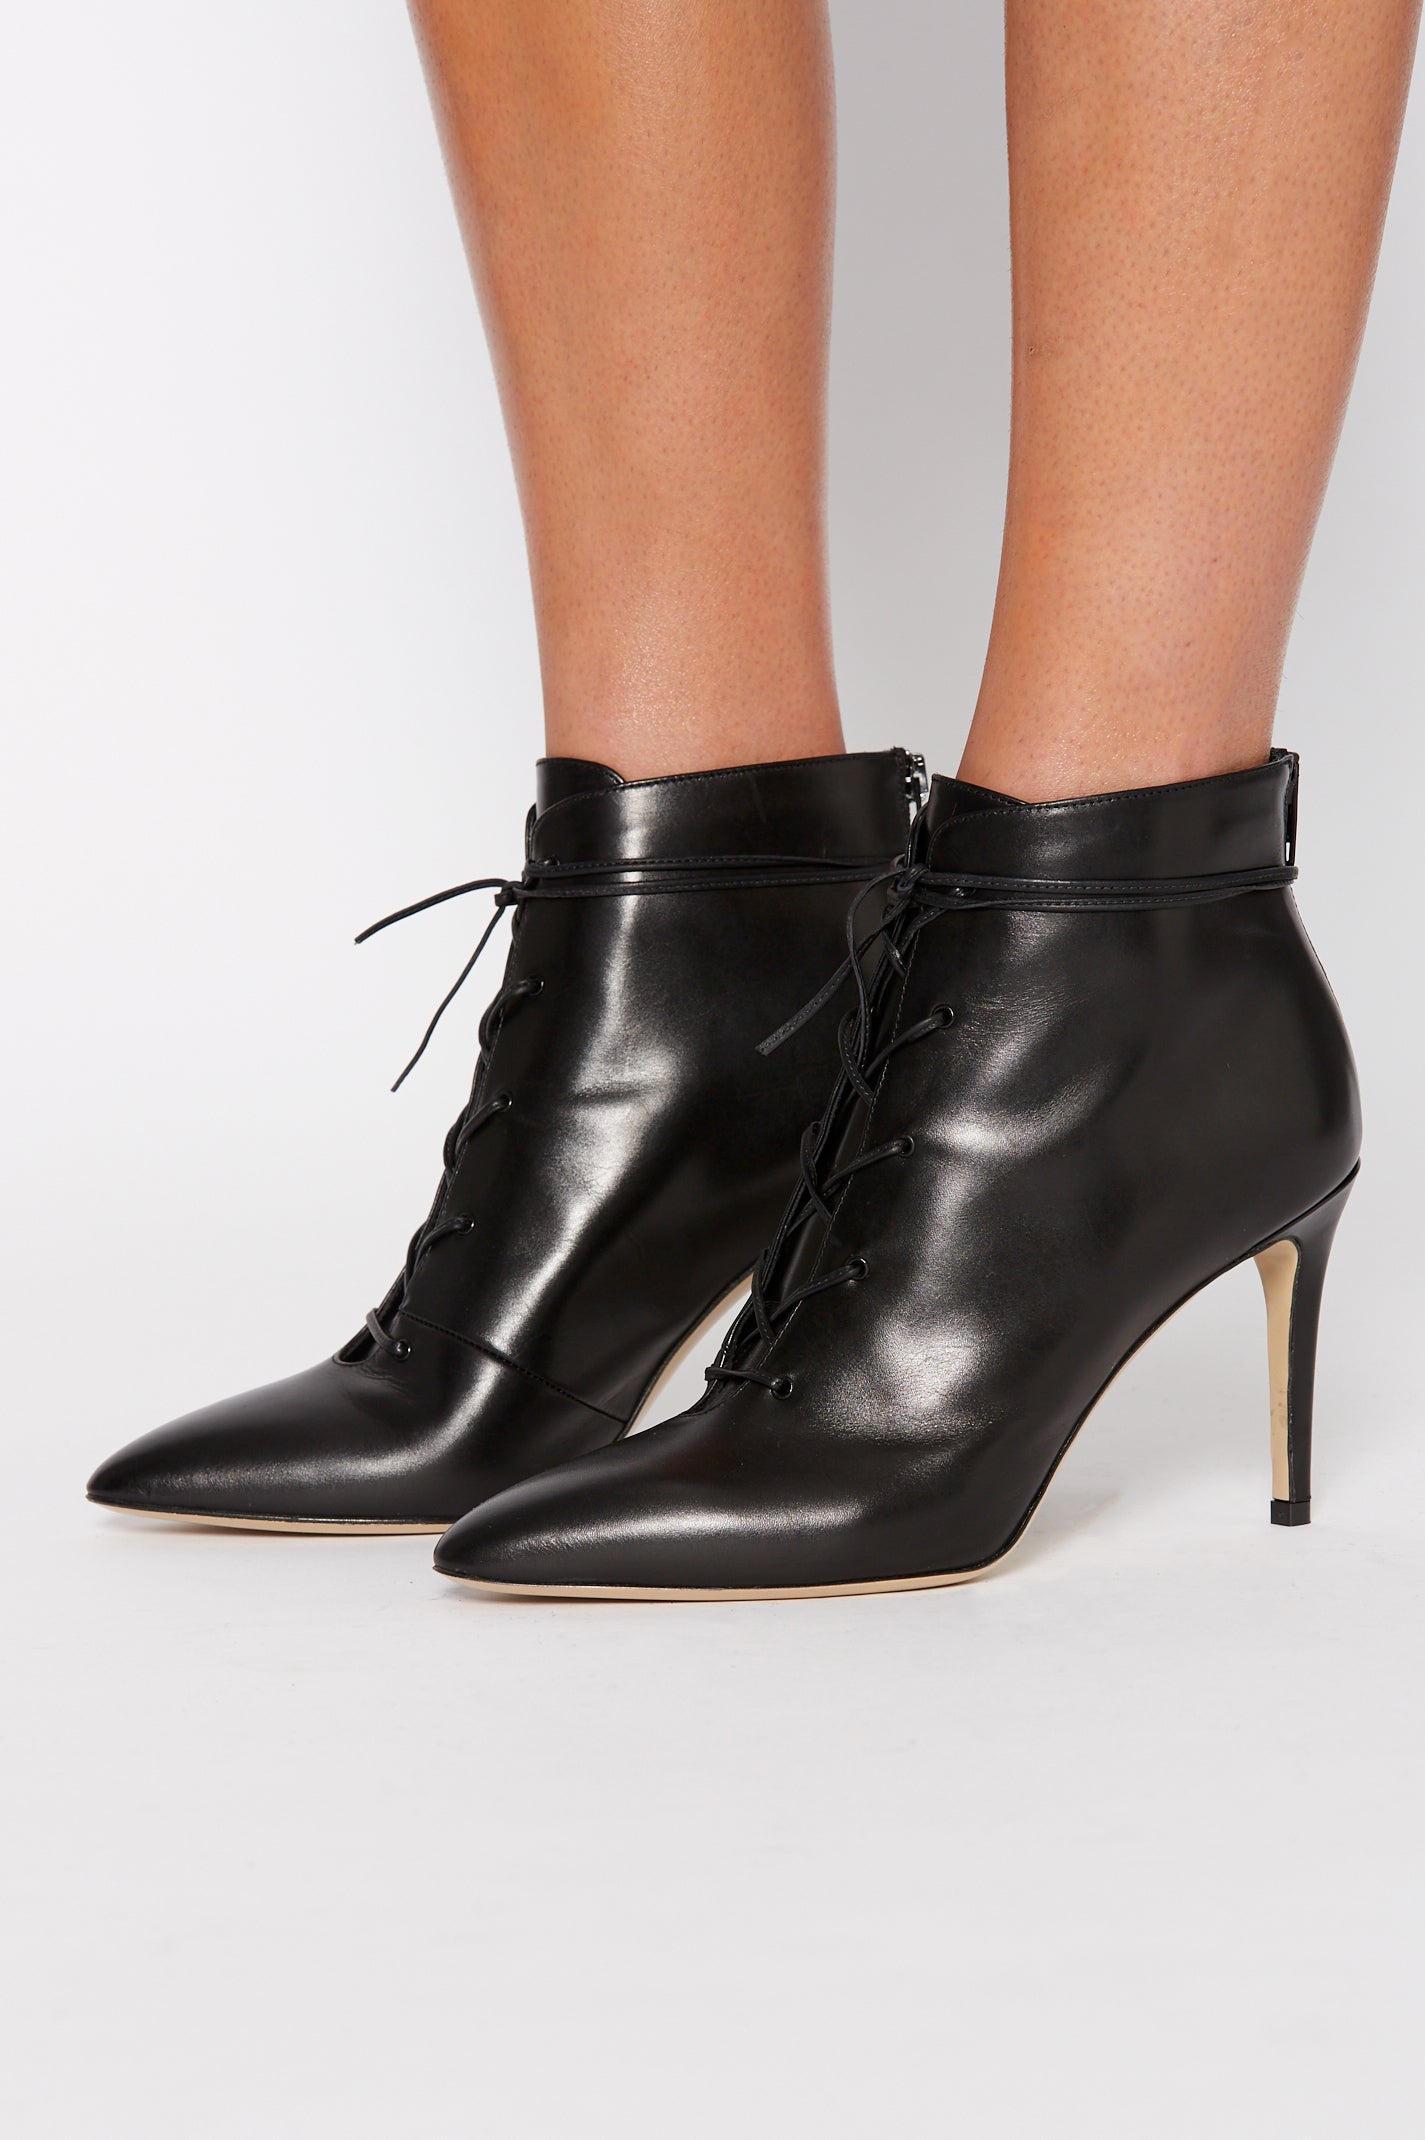 LACE-UP ANKLE BOOT 8.5 NERO